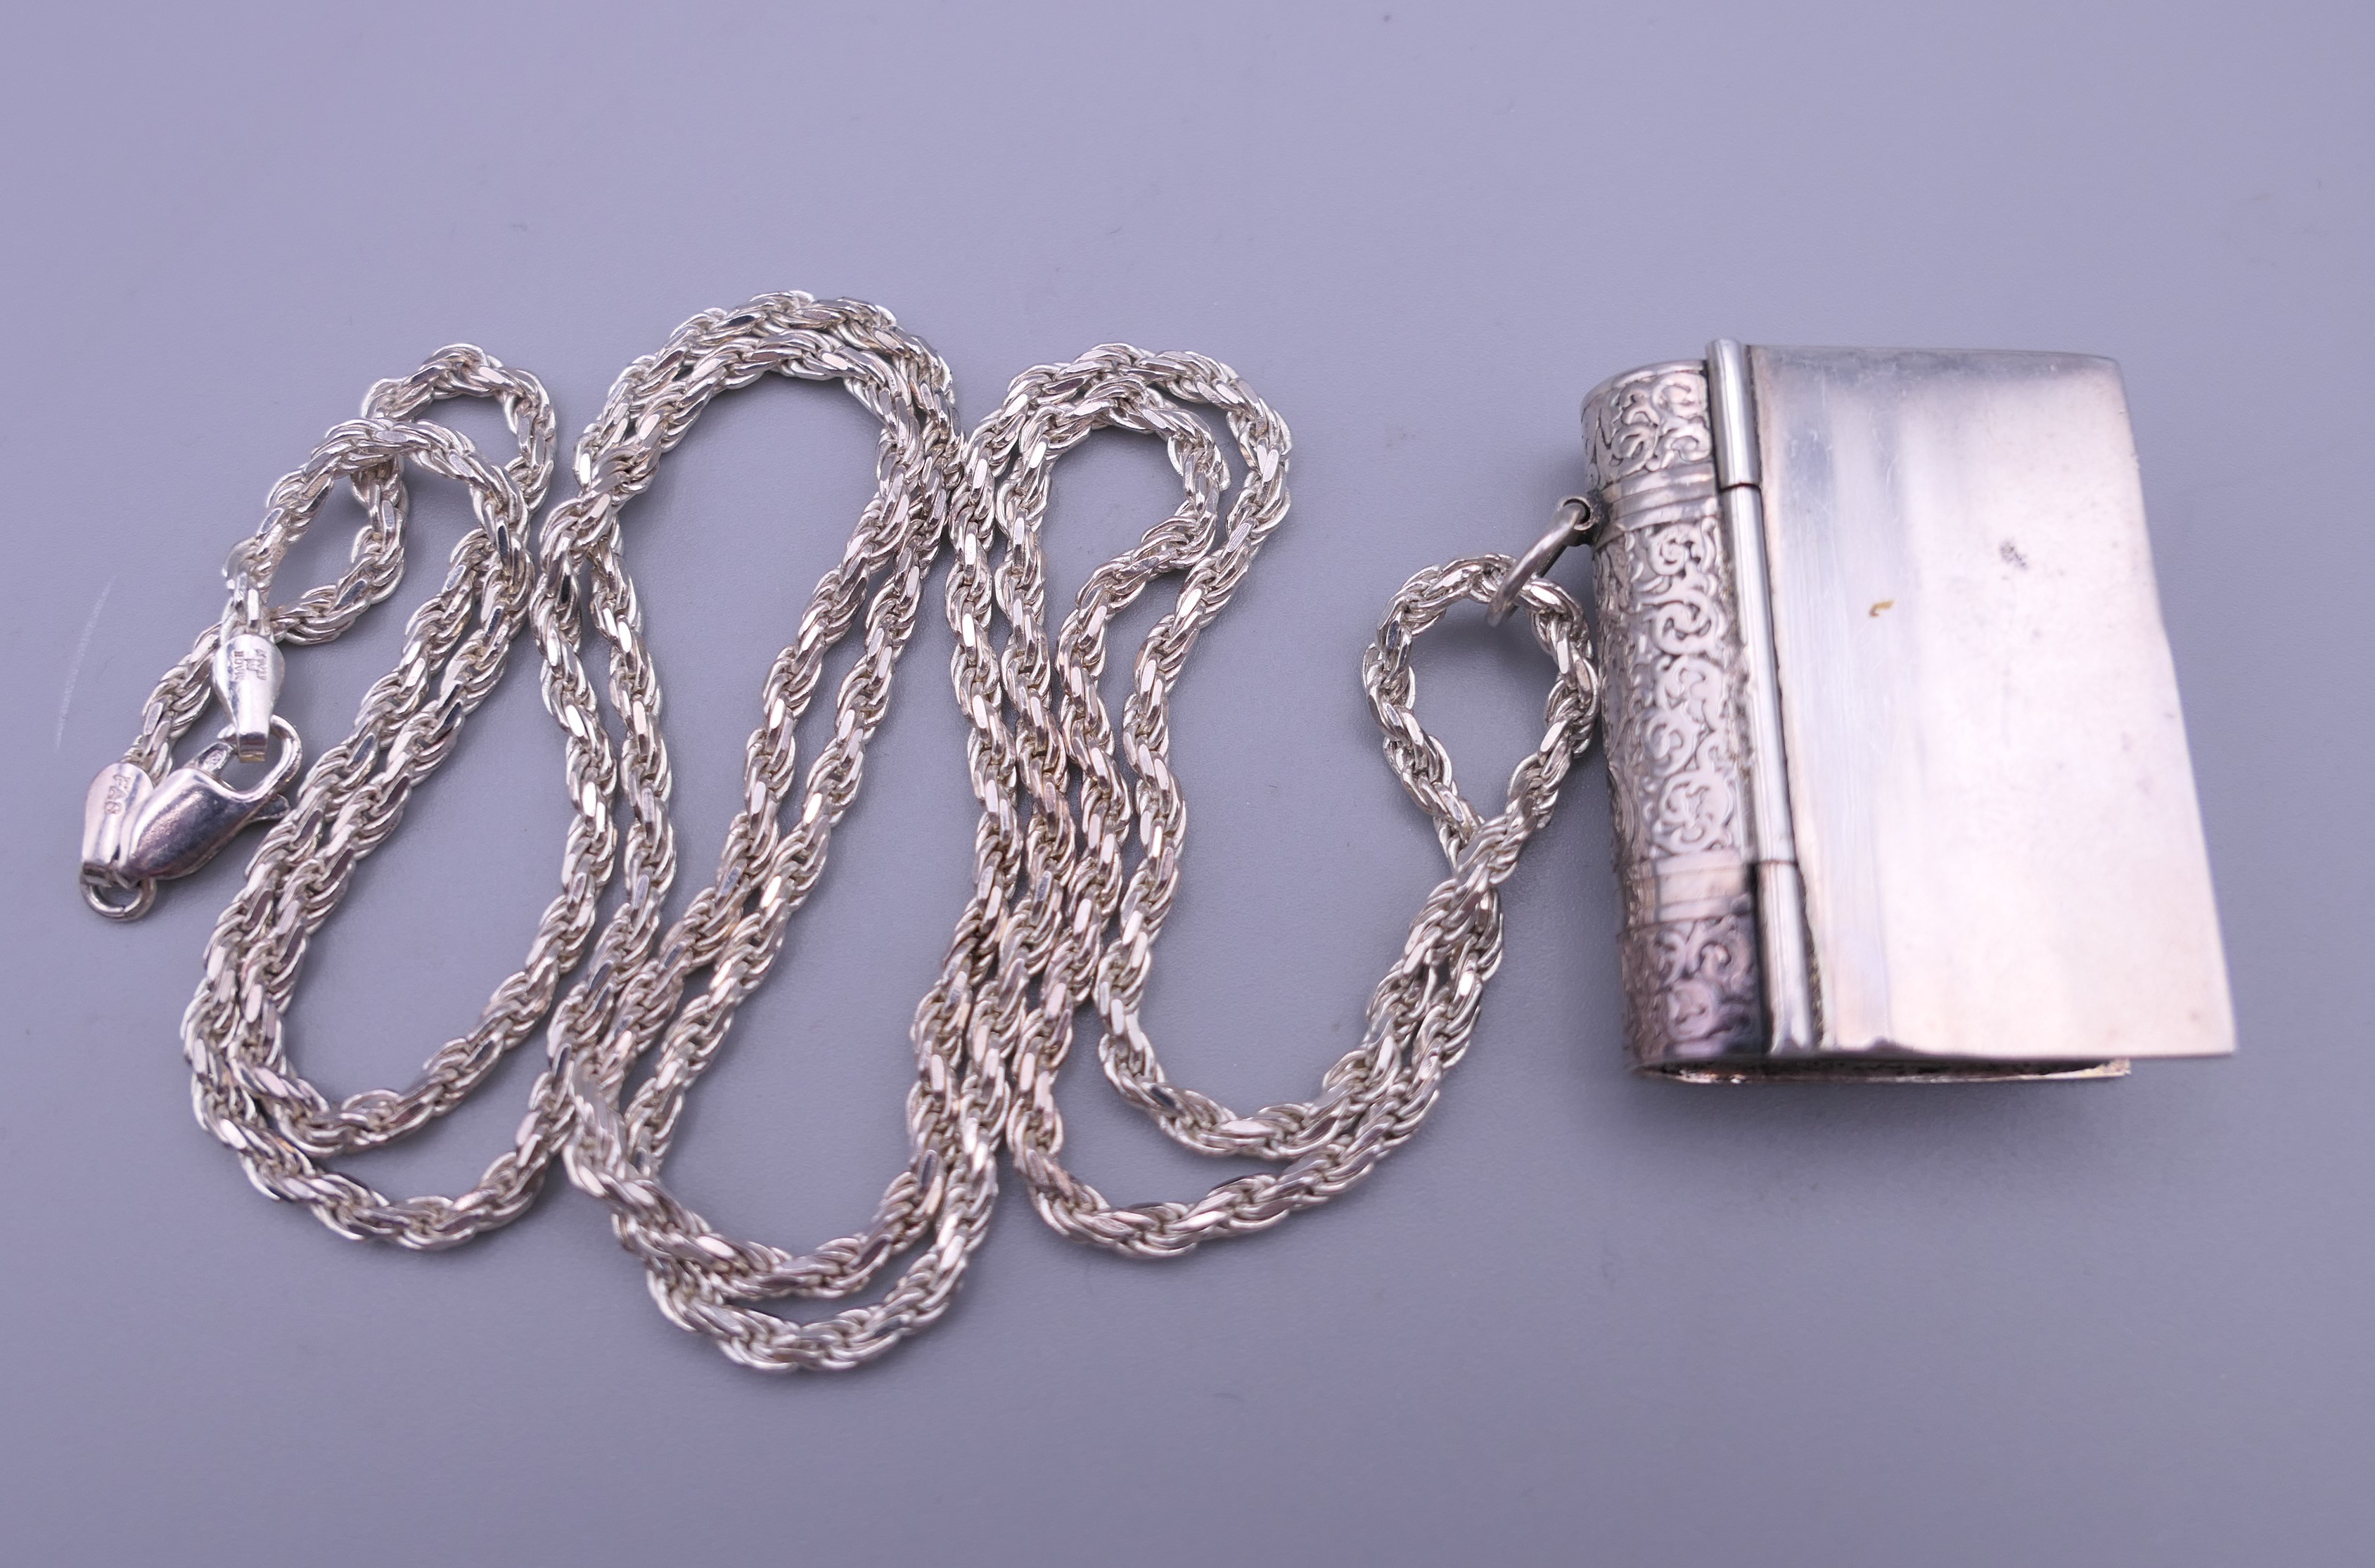 A book form pendant on chain. The pendant 3.5 cm high.